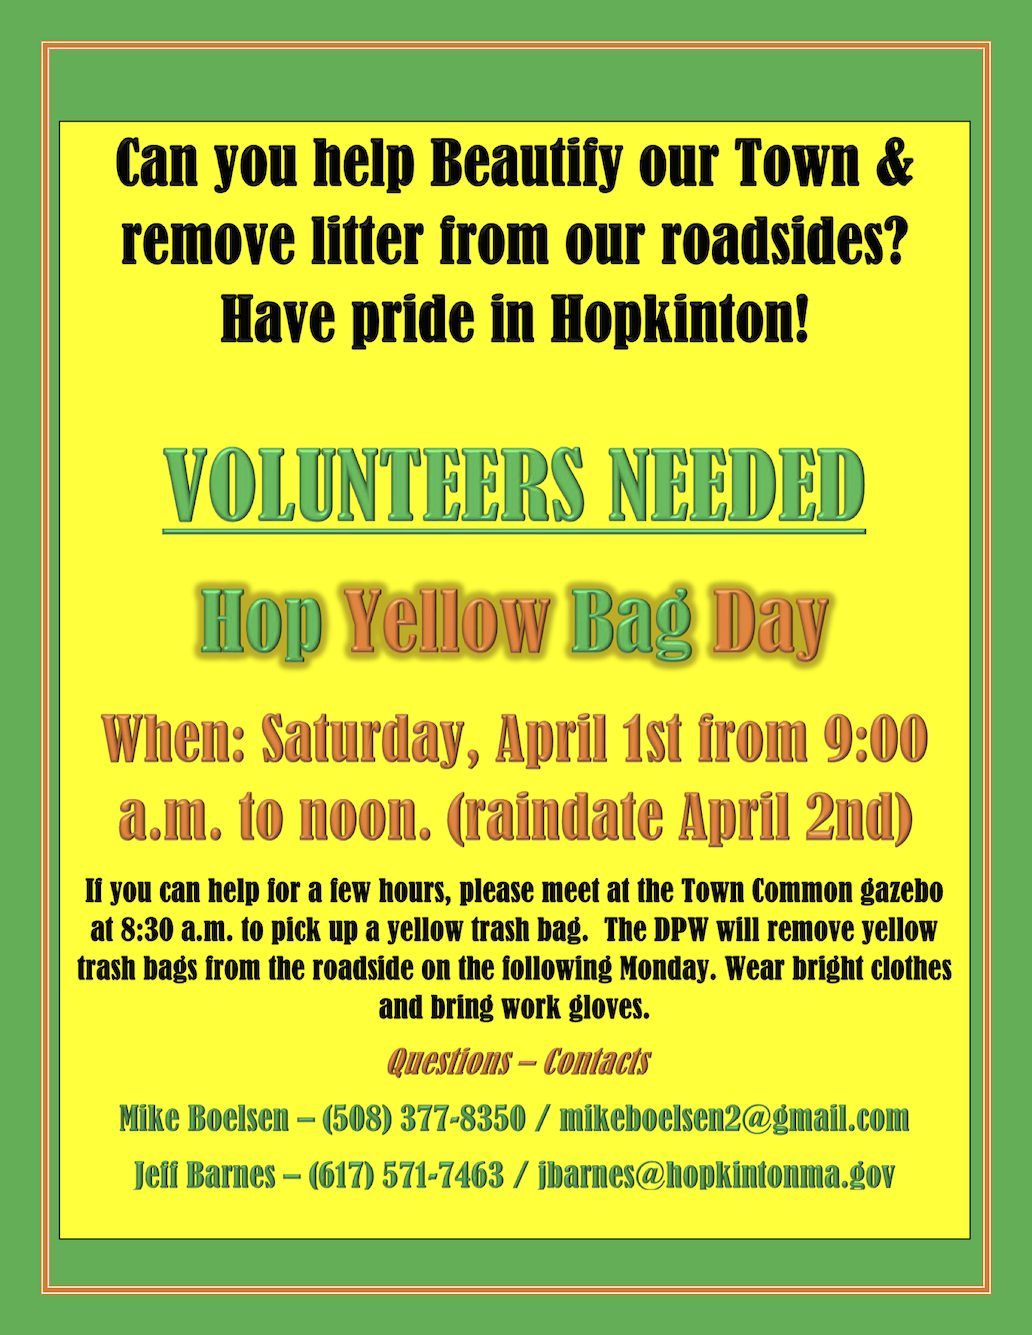 Yellow Bag Day town cleanup April 1